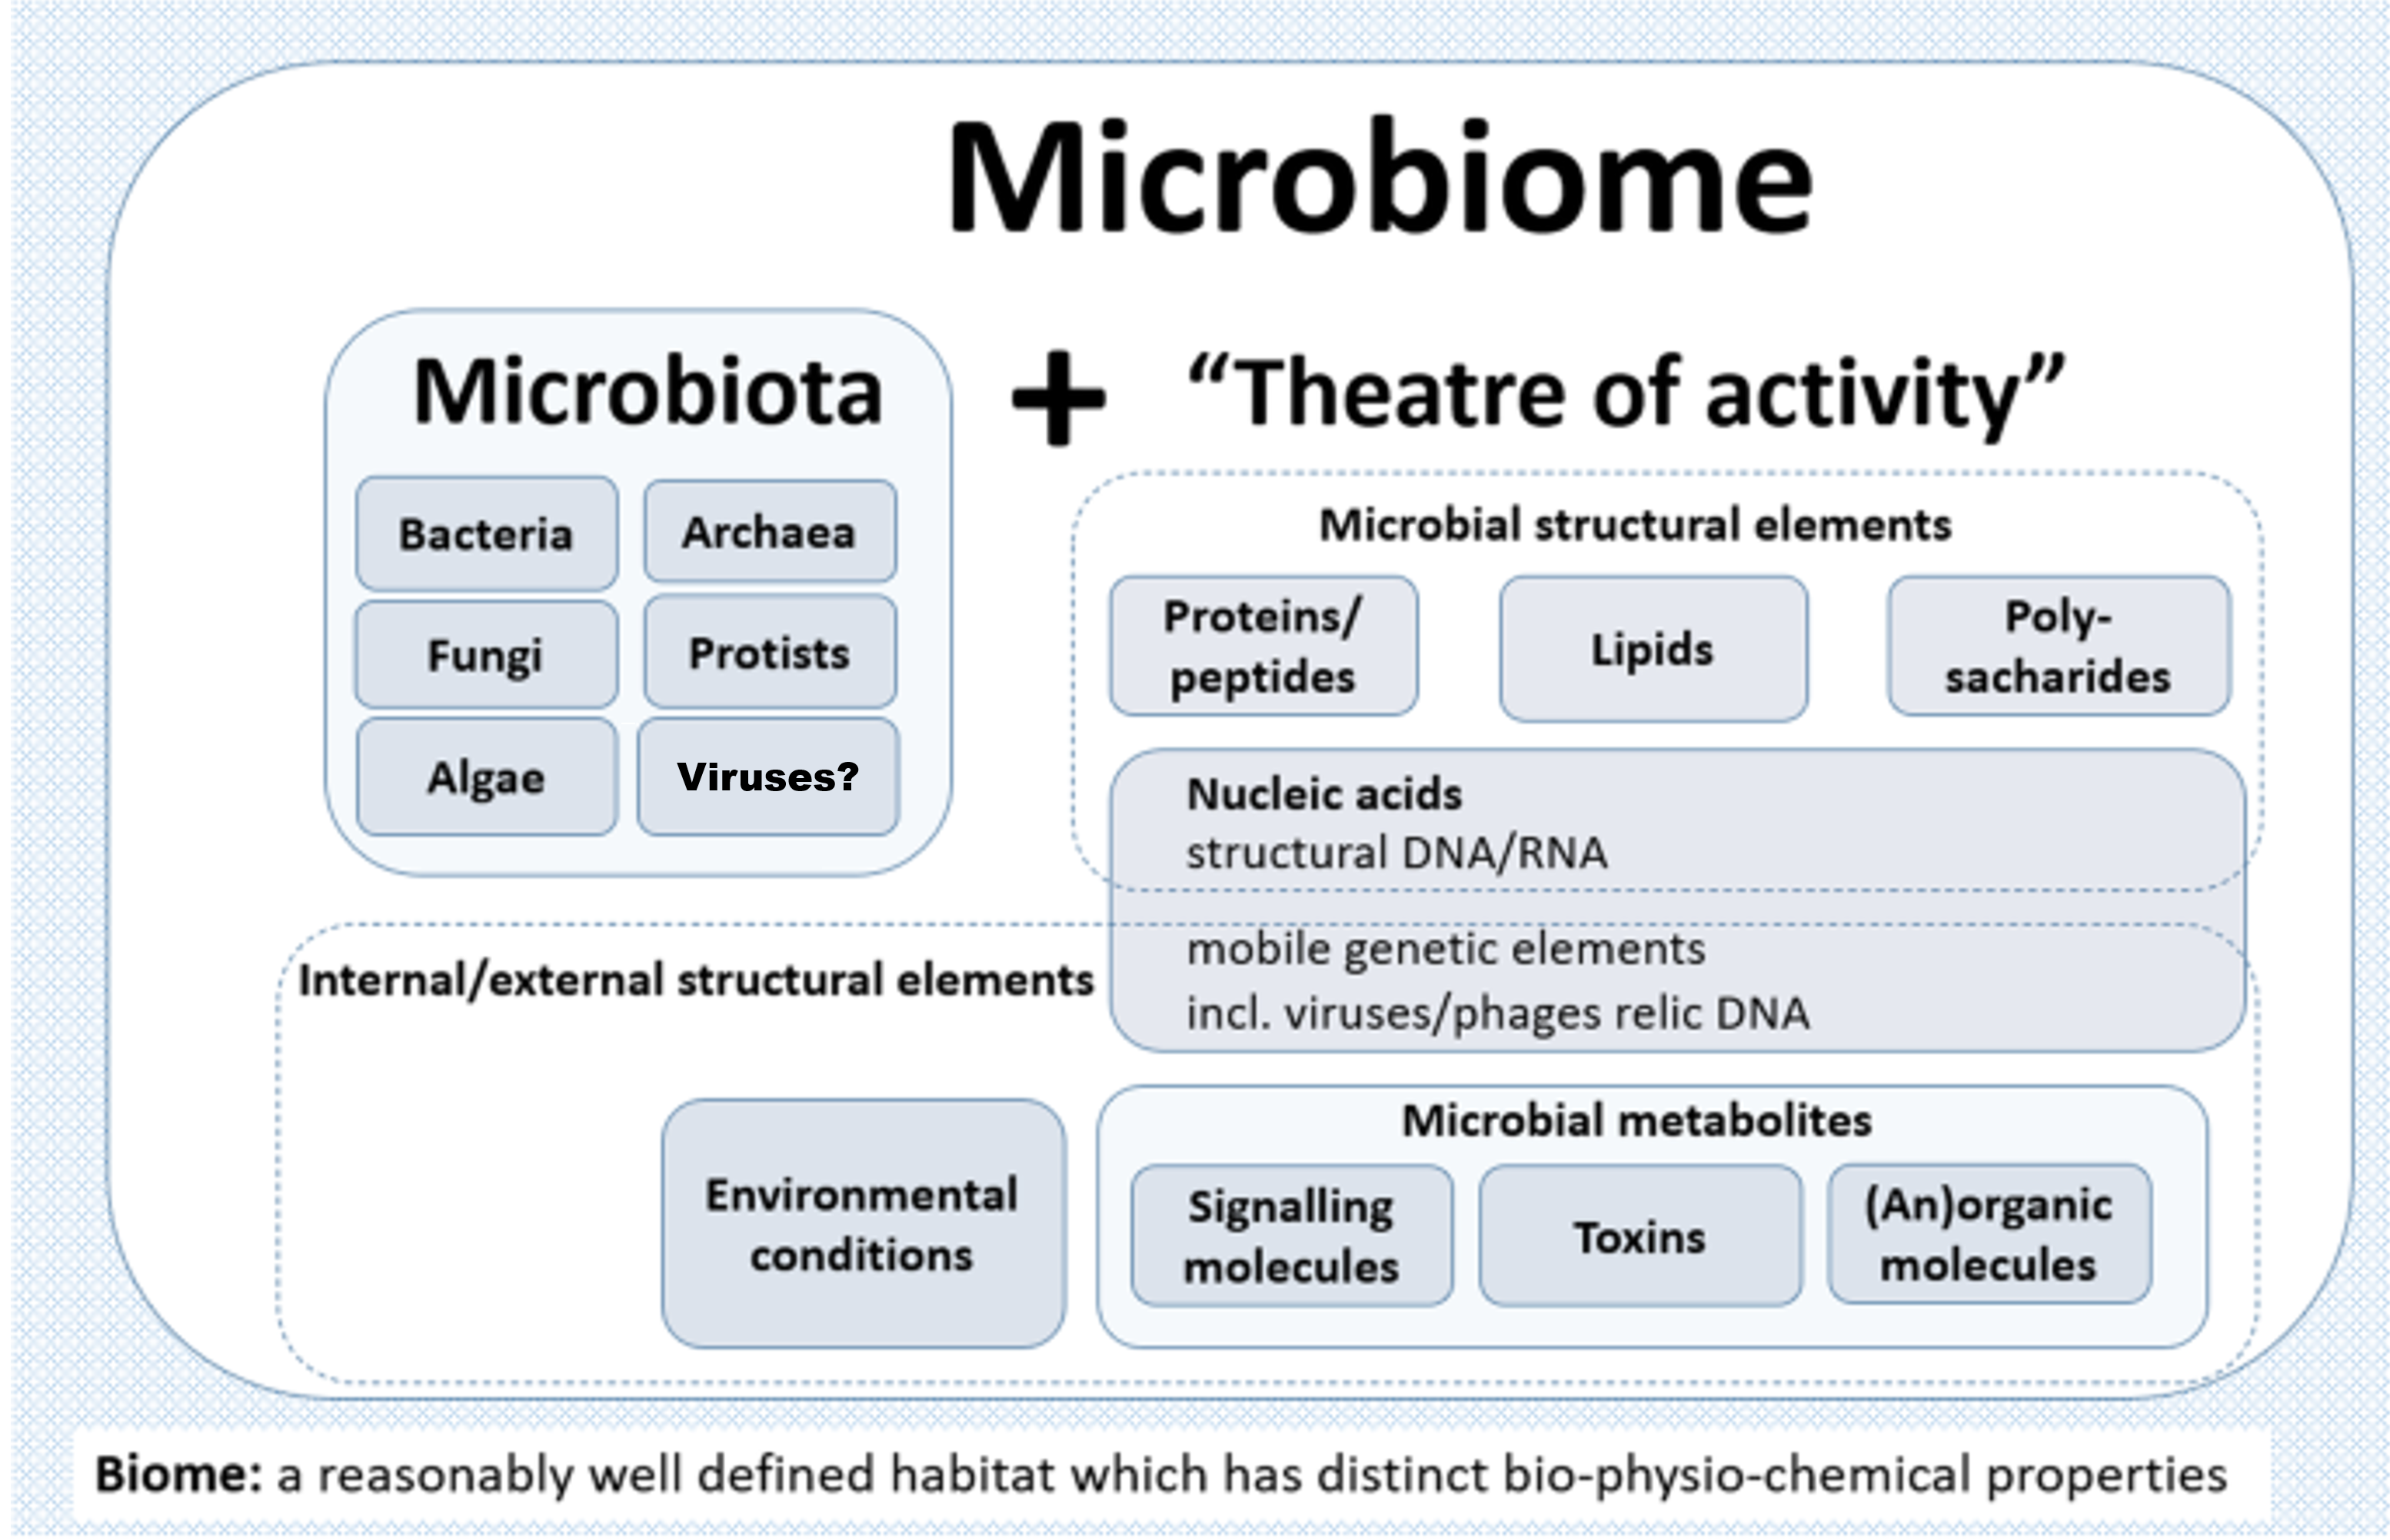 Diagram showing the definition of a microbiome, which includes all microorganisms and their interactions in a defined area and time.